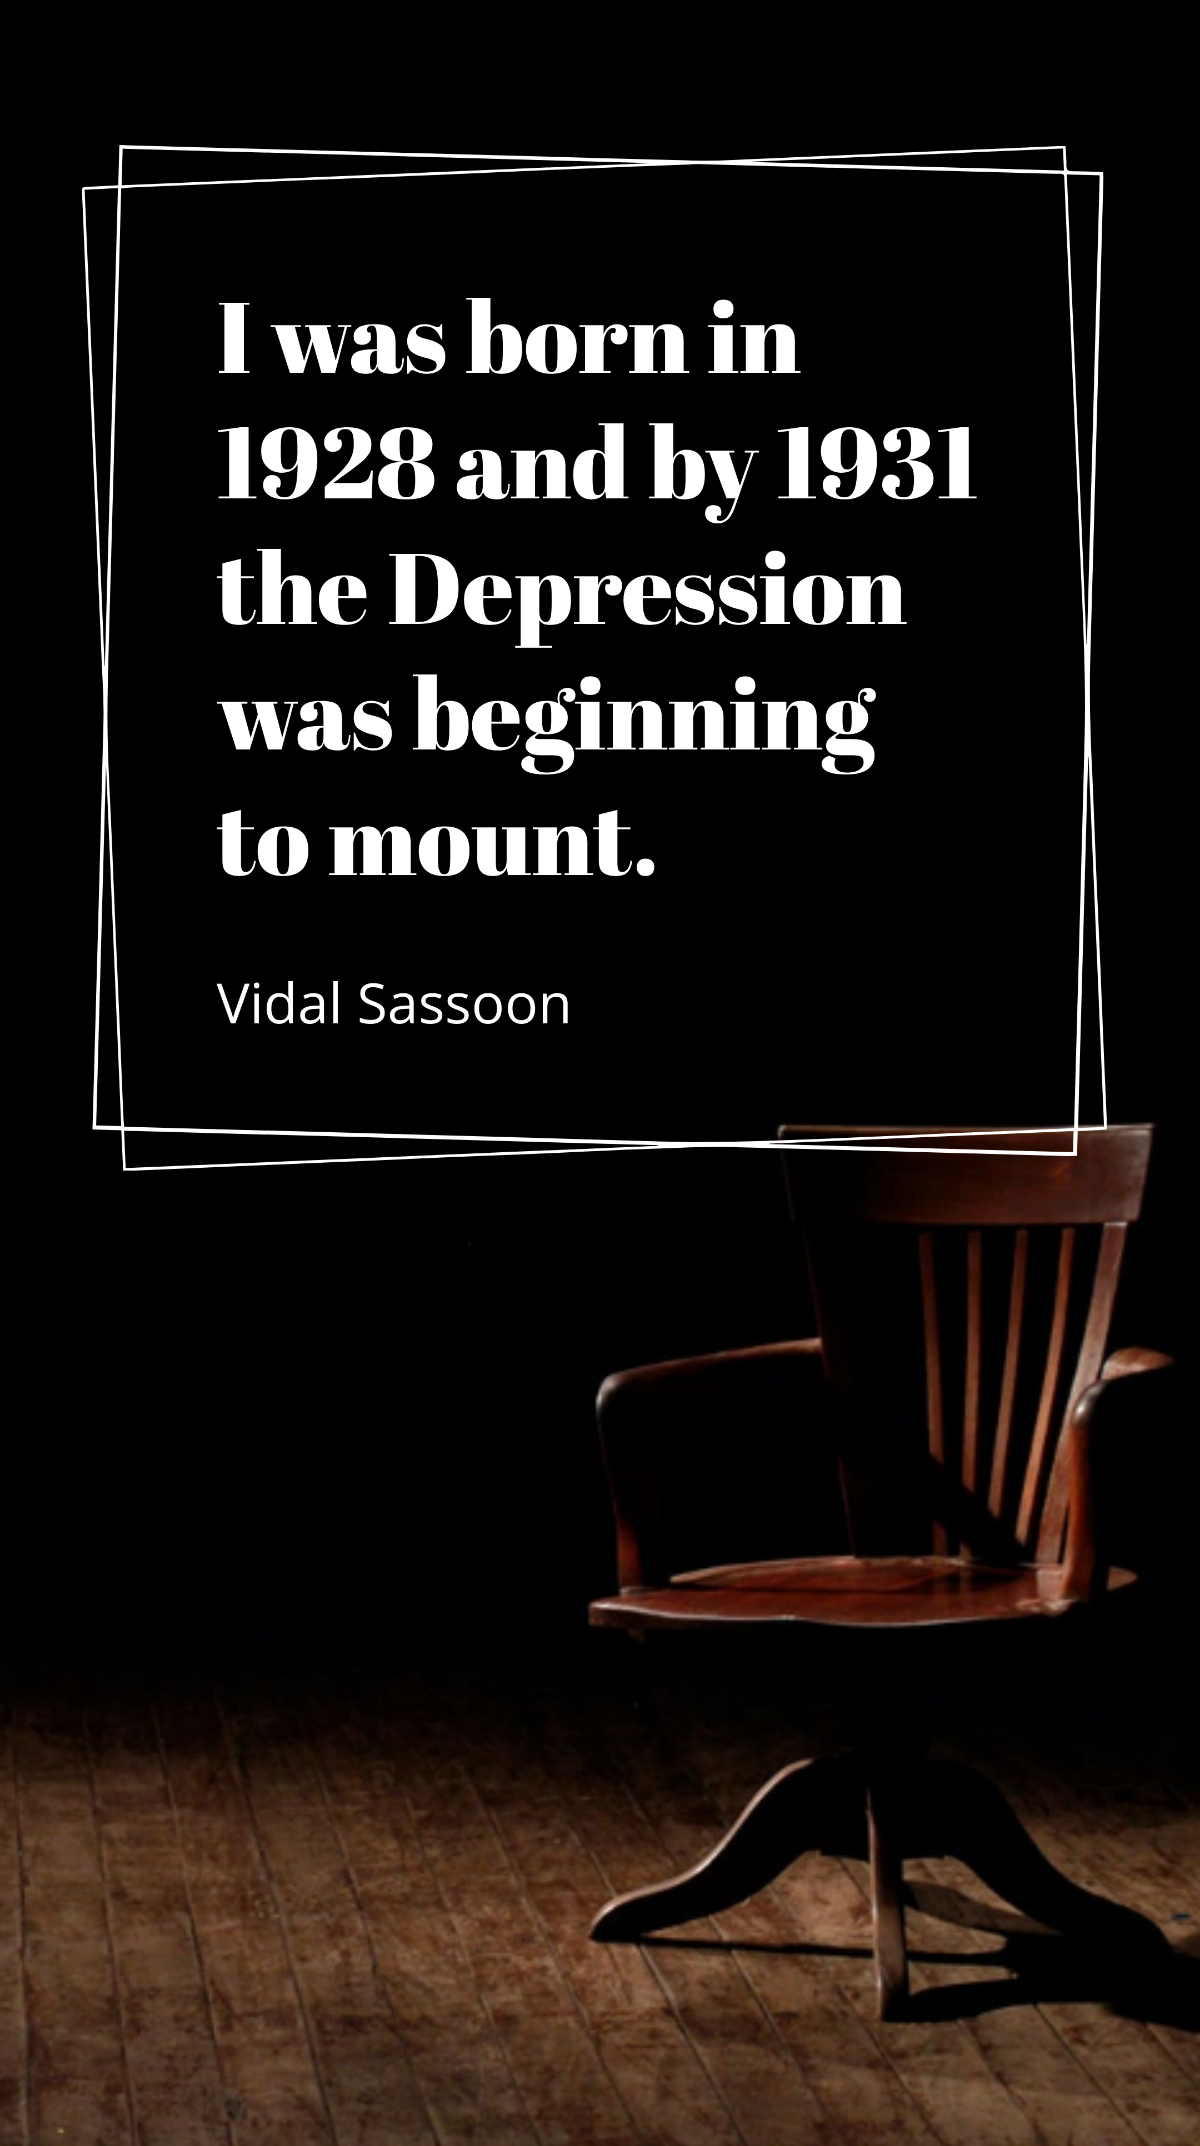 Vidal Sassoon - I was born in 1928 and by 1931 the Depression was beginning to mount. Template